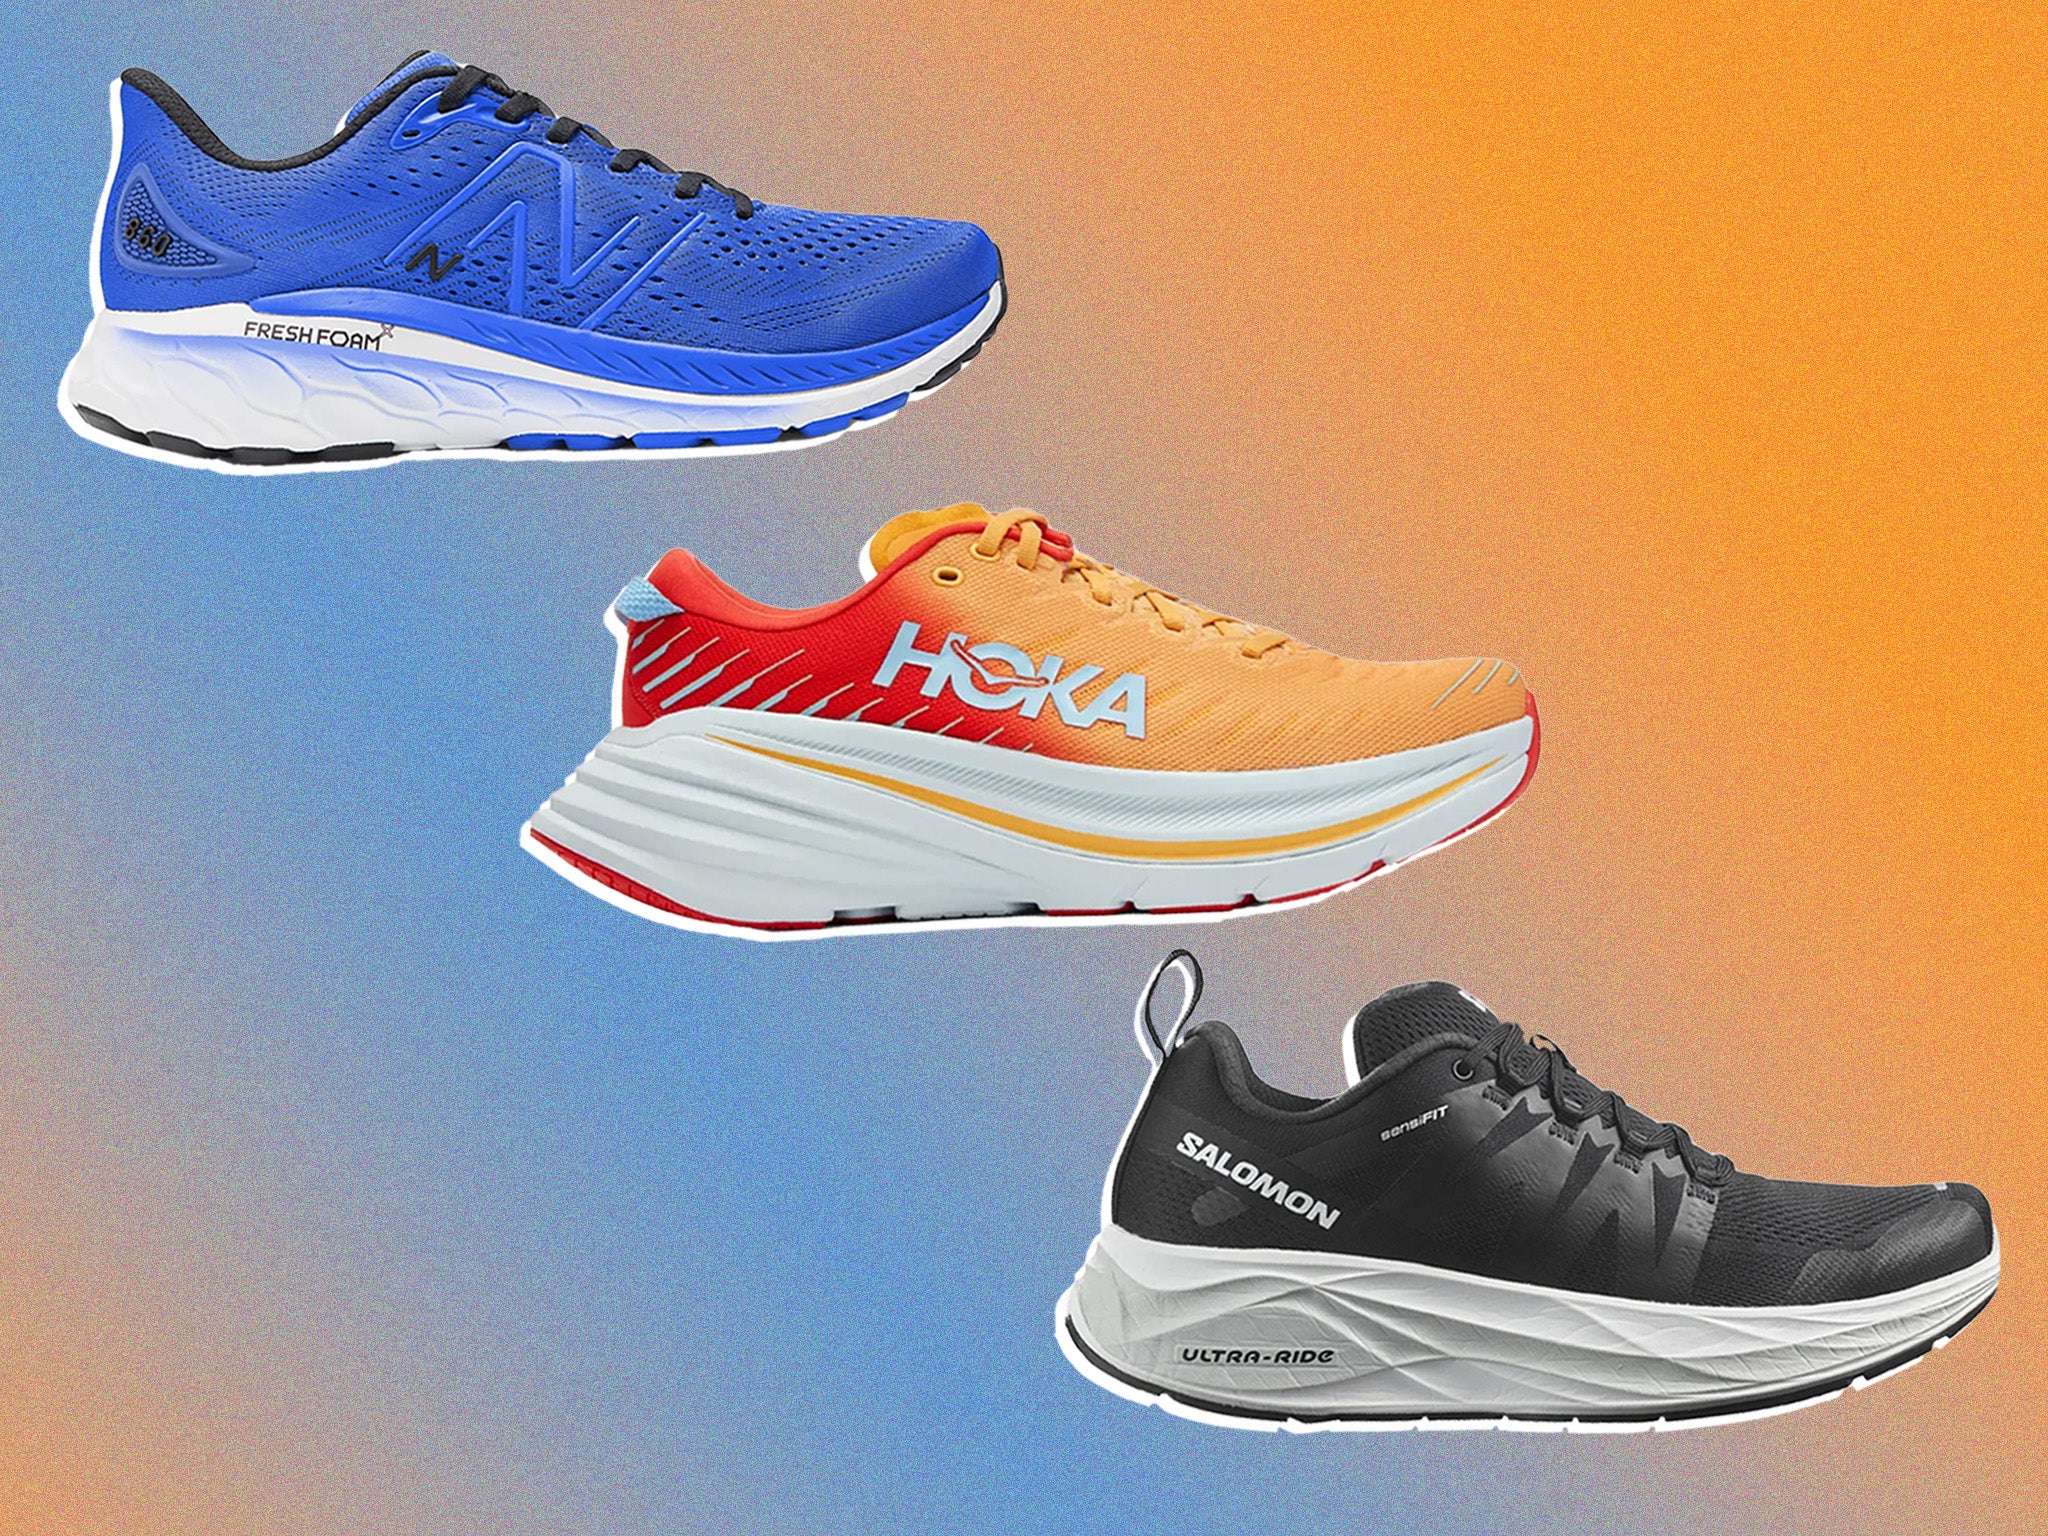 The Best Retro Running Shoes To Buy In 2023 | FashionBeans